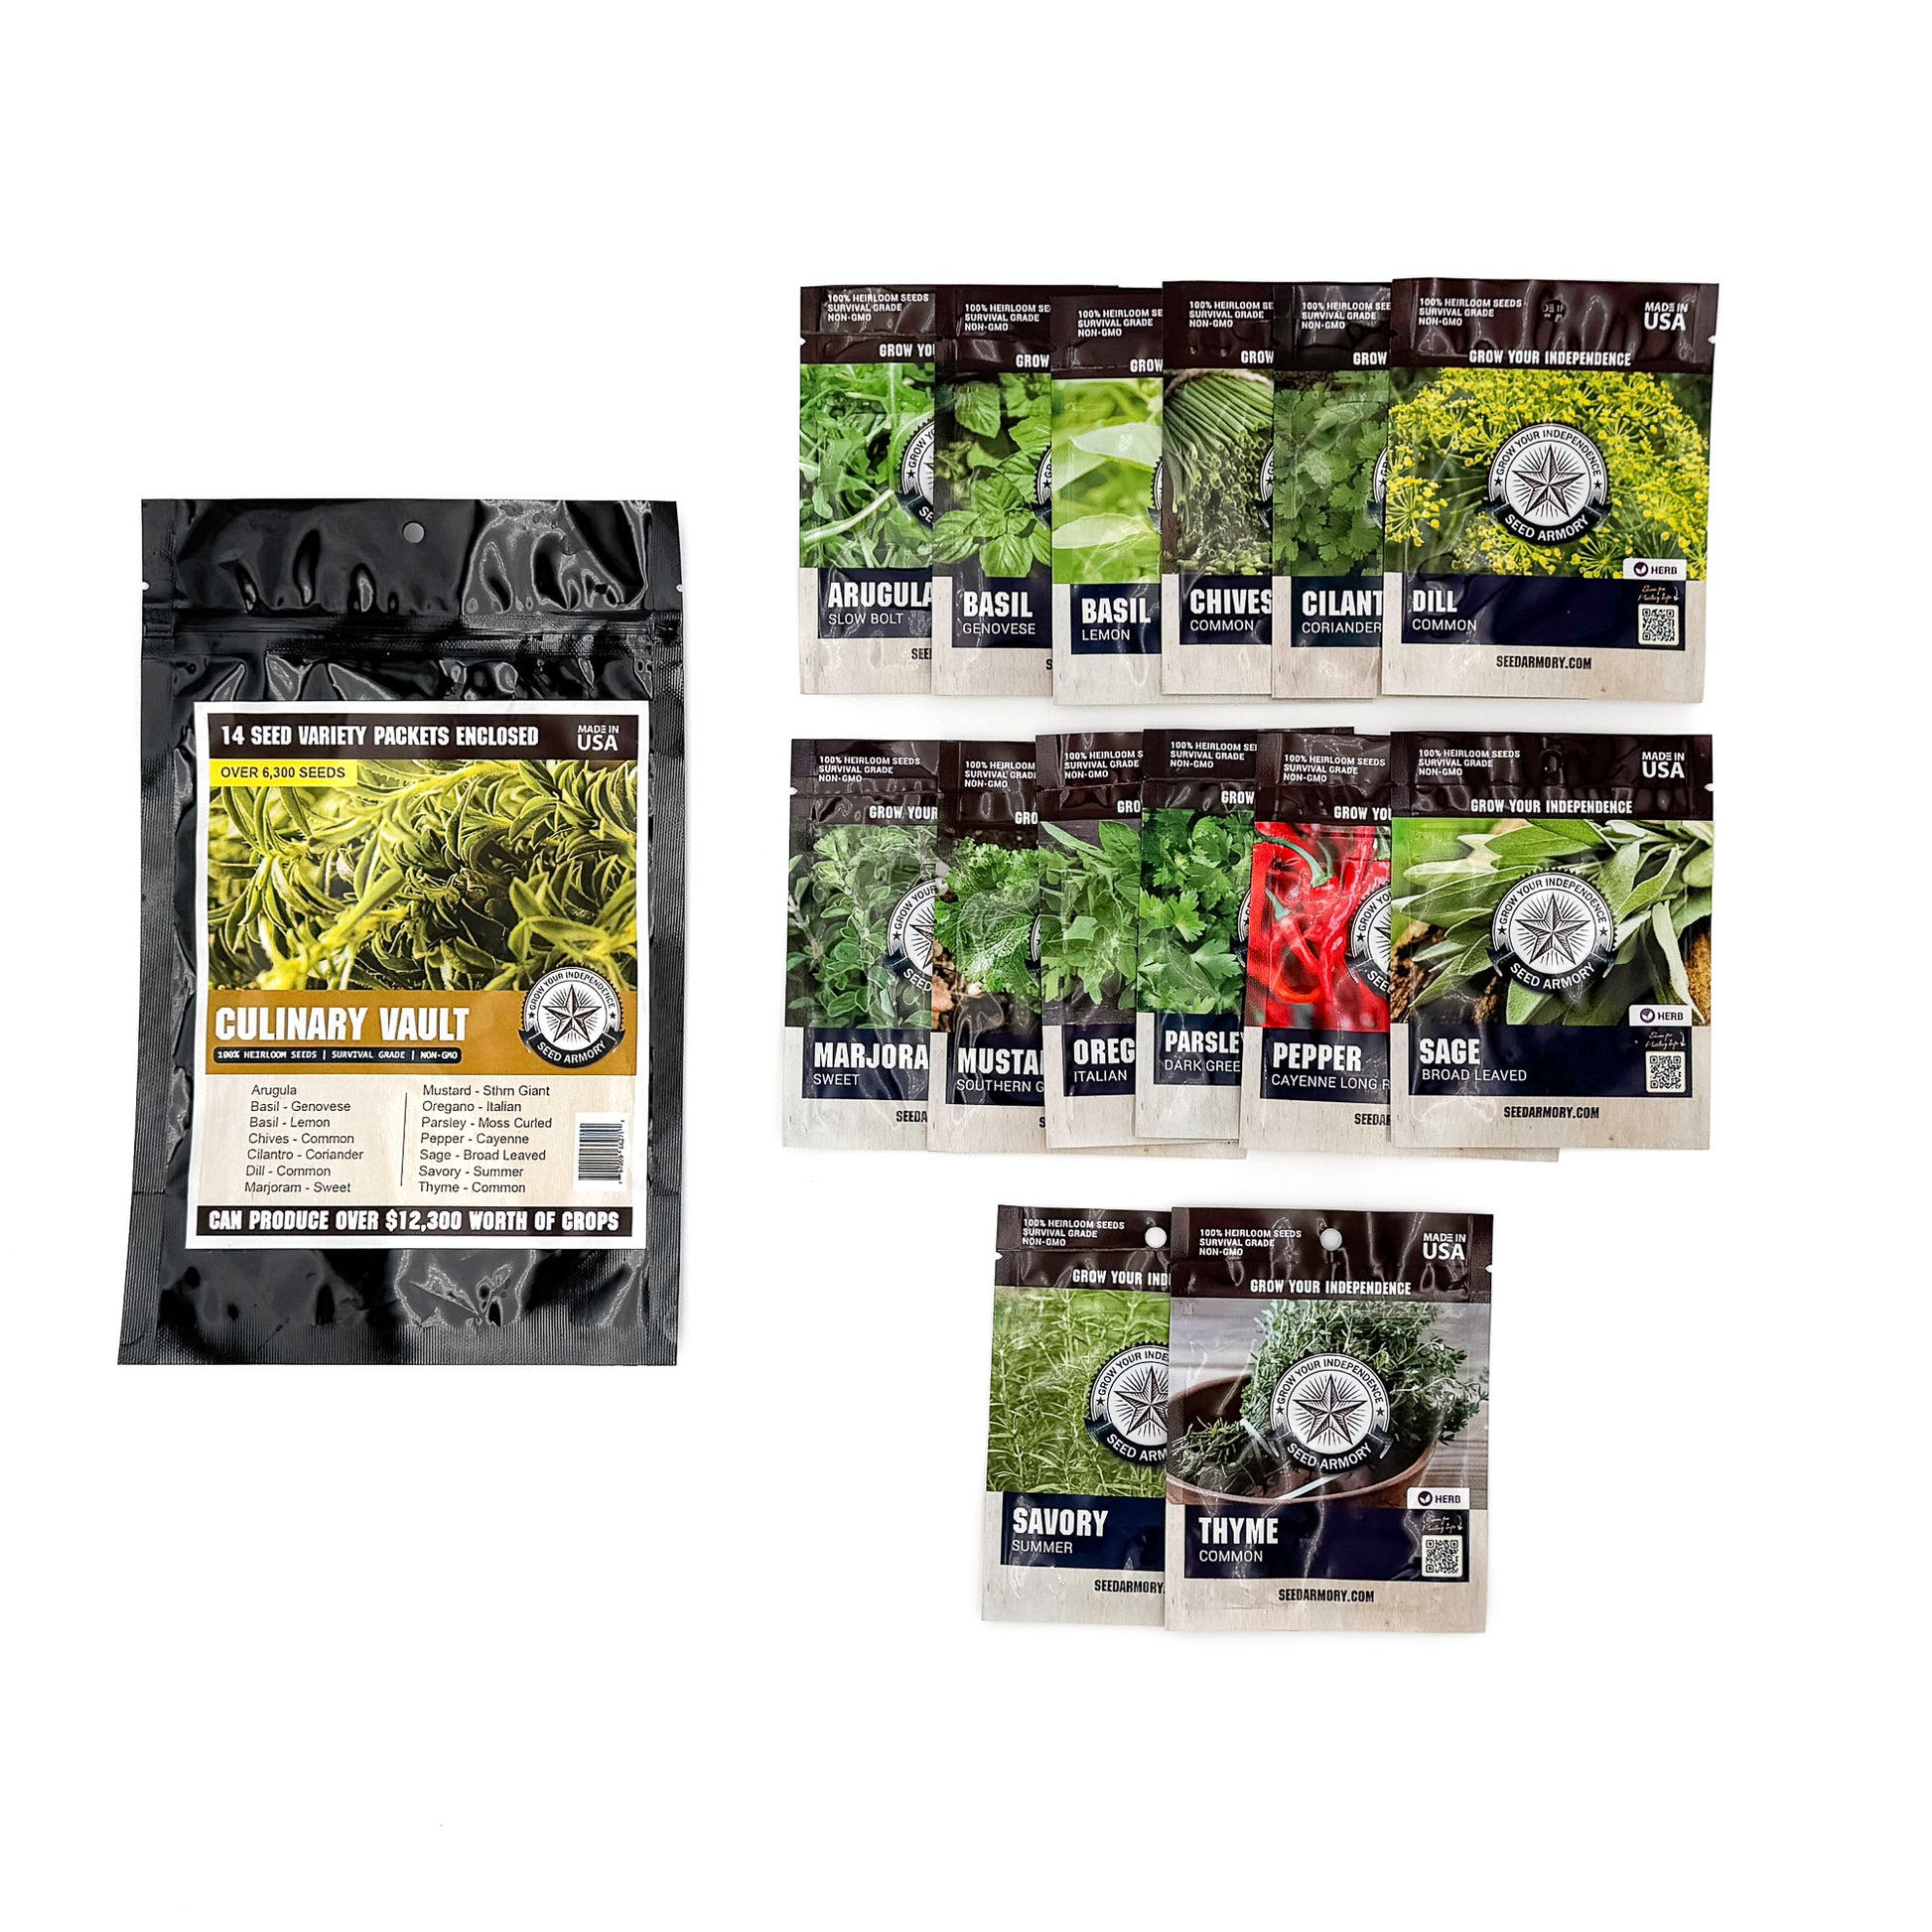 Assortment of 14 seed packets from the Culinary Seed Vault